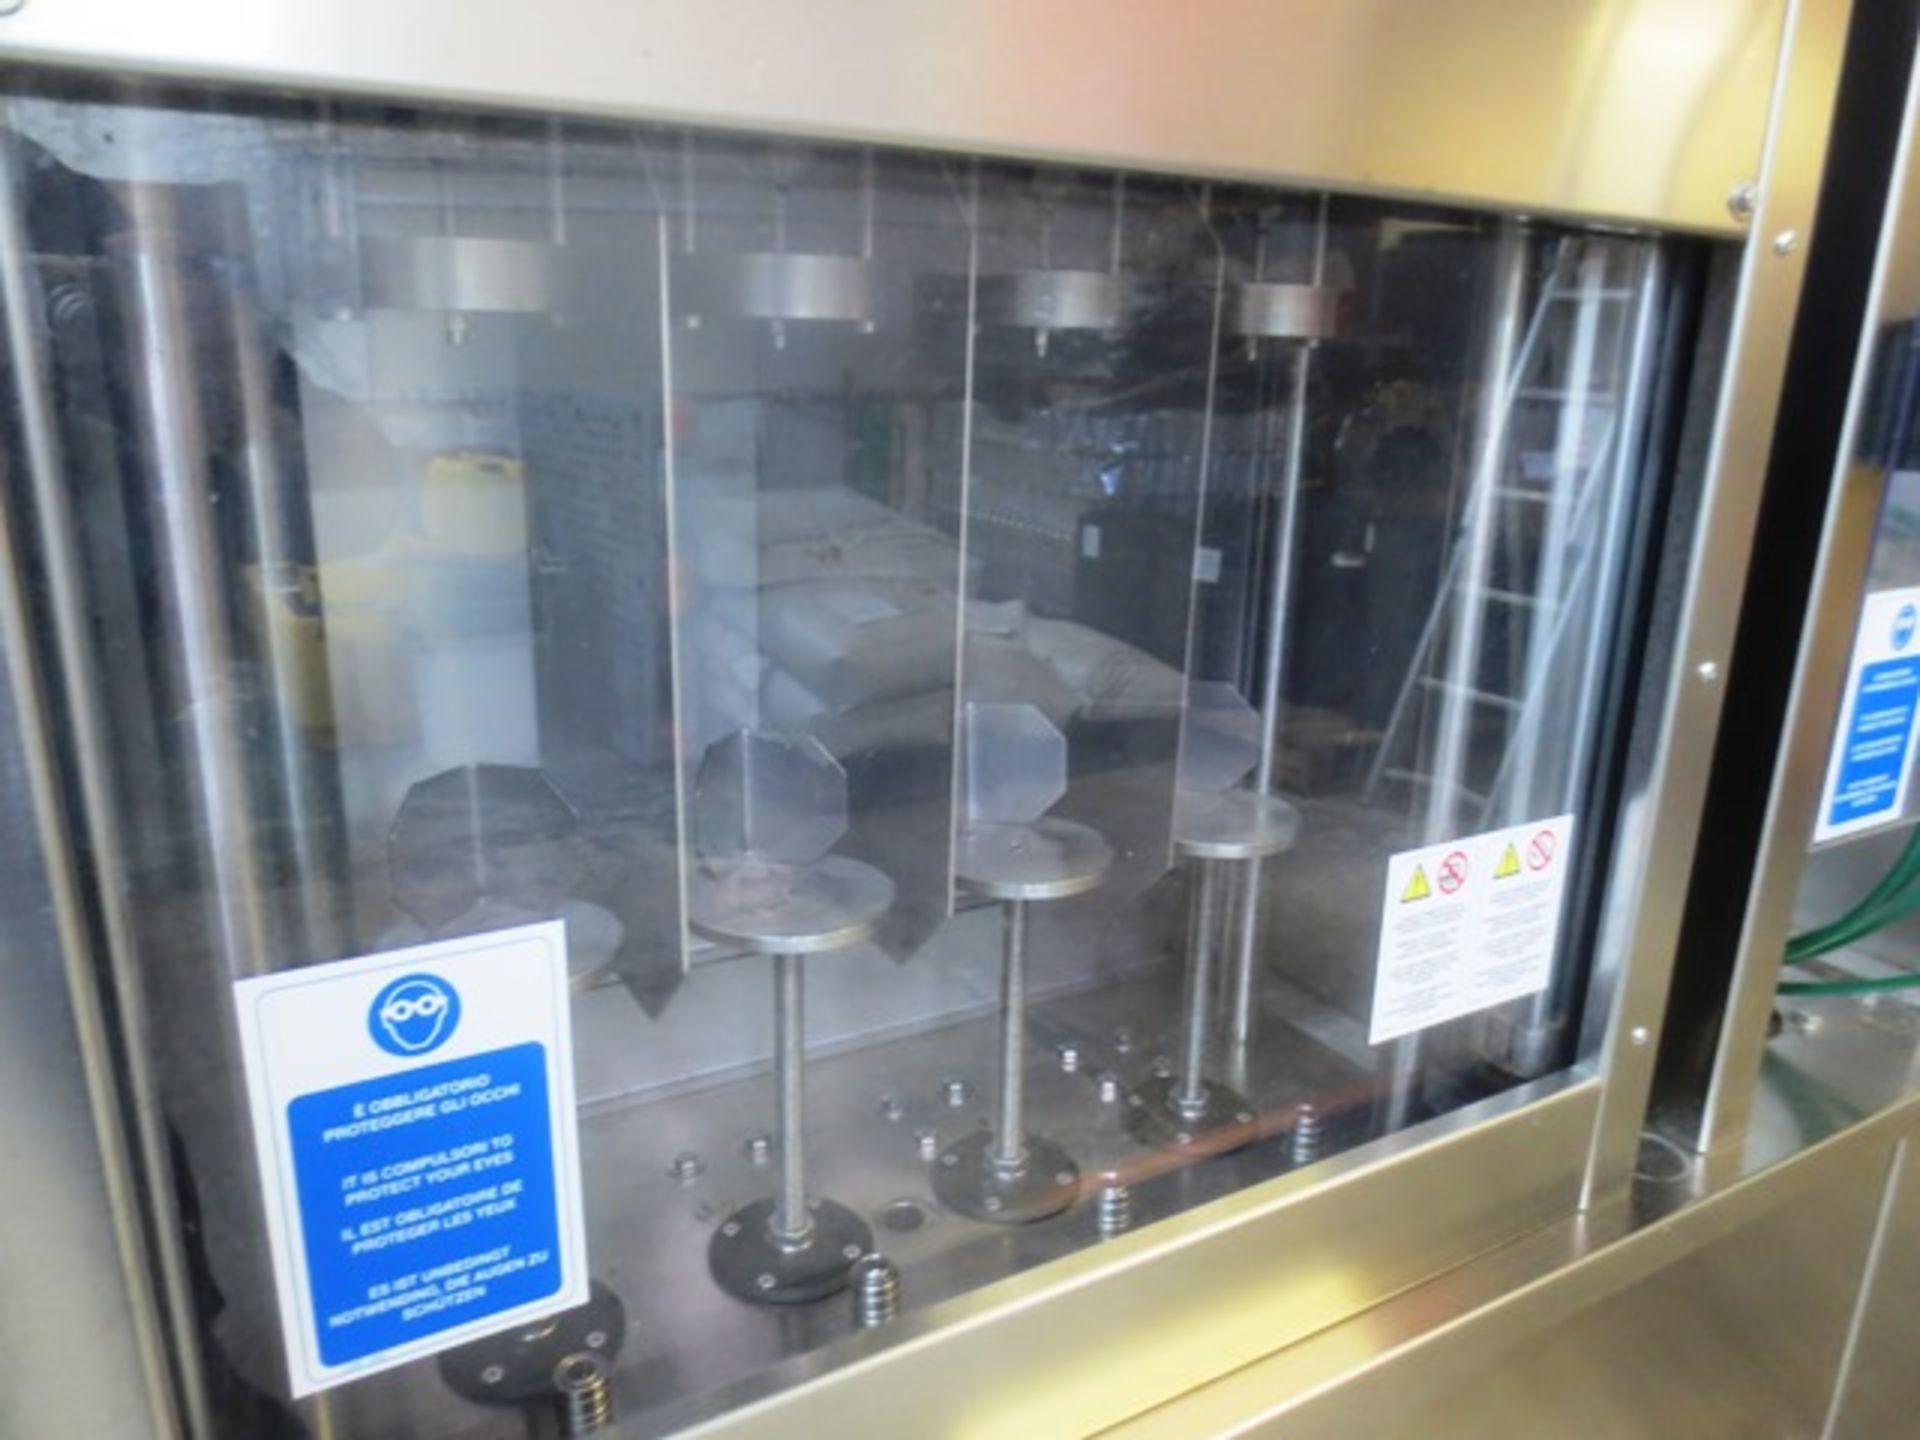 IC Filling Systems stainless steel 4 head bottle filler and capping station, model 441 Compact - Image 2 of 4